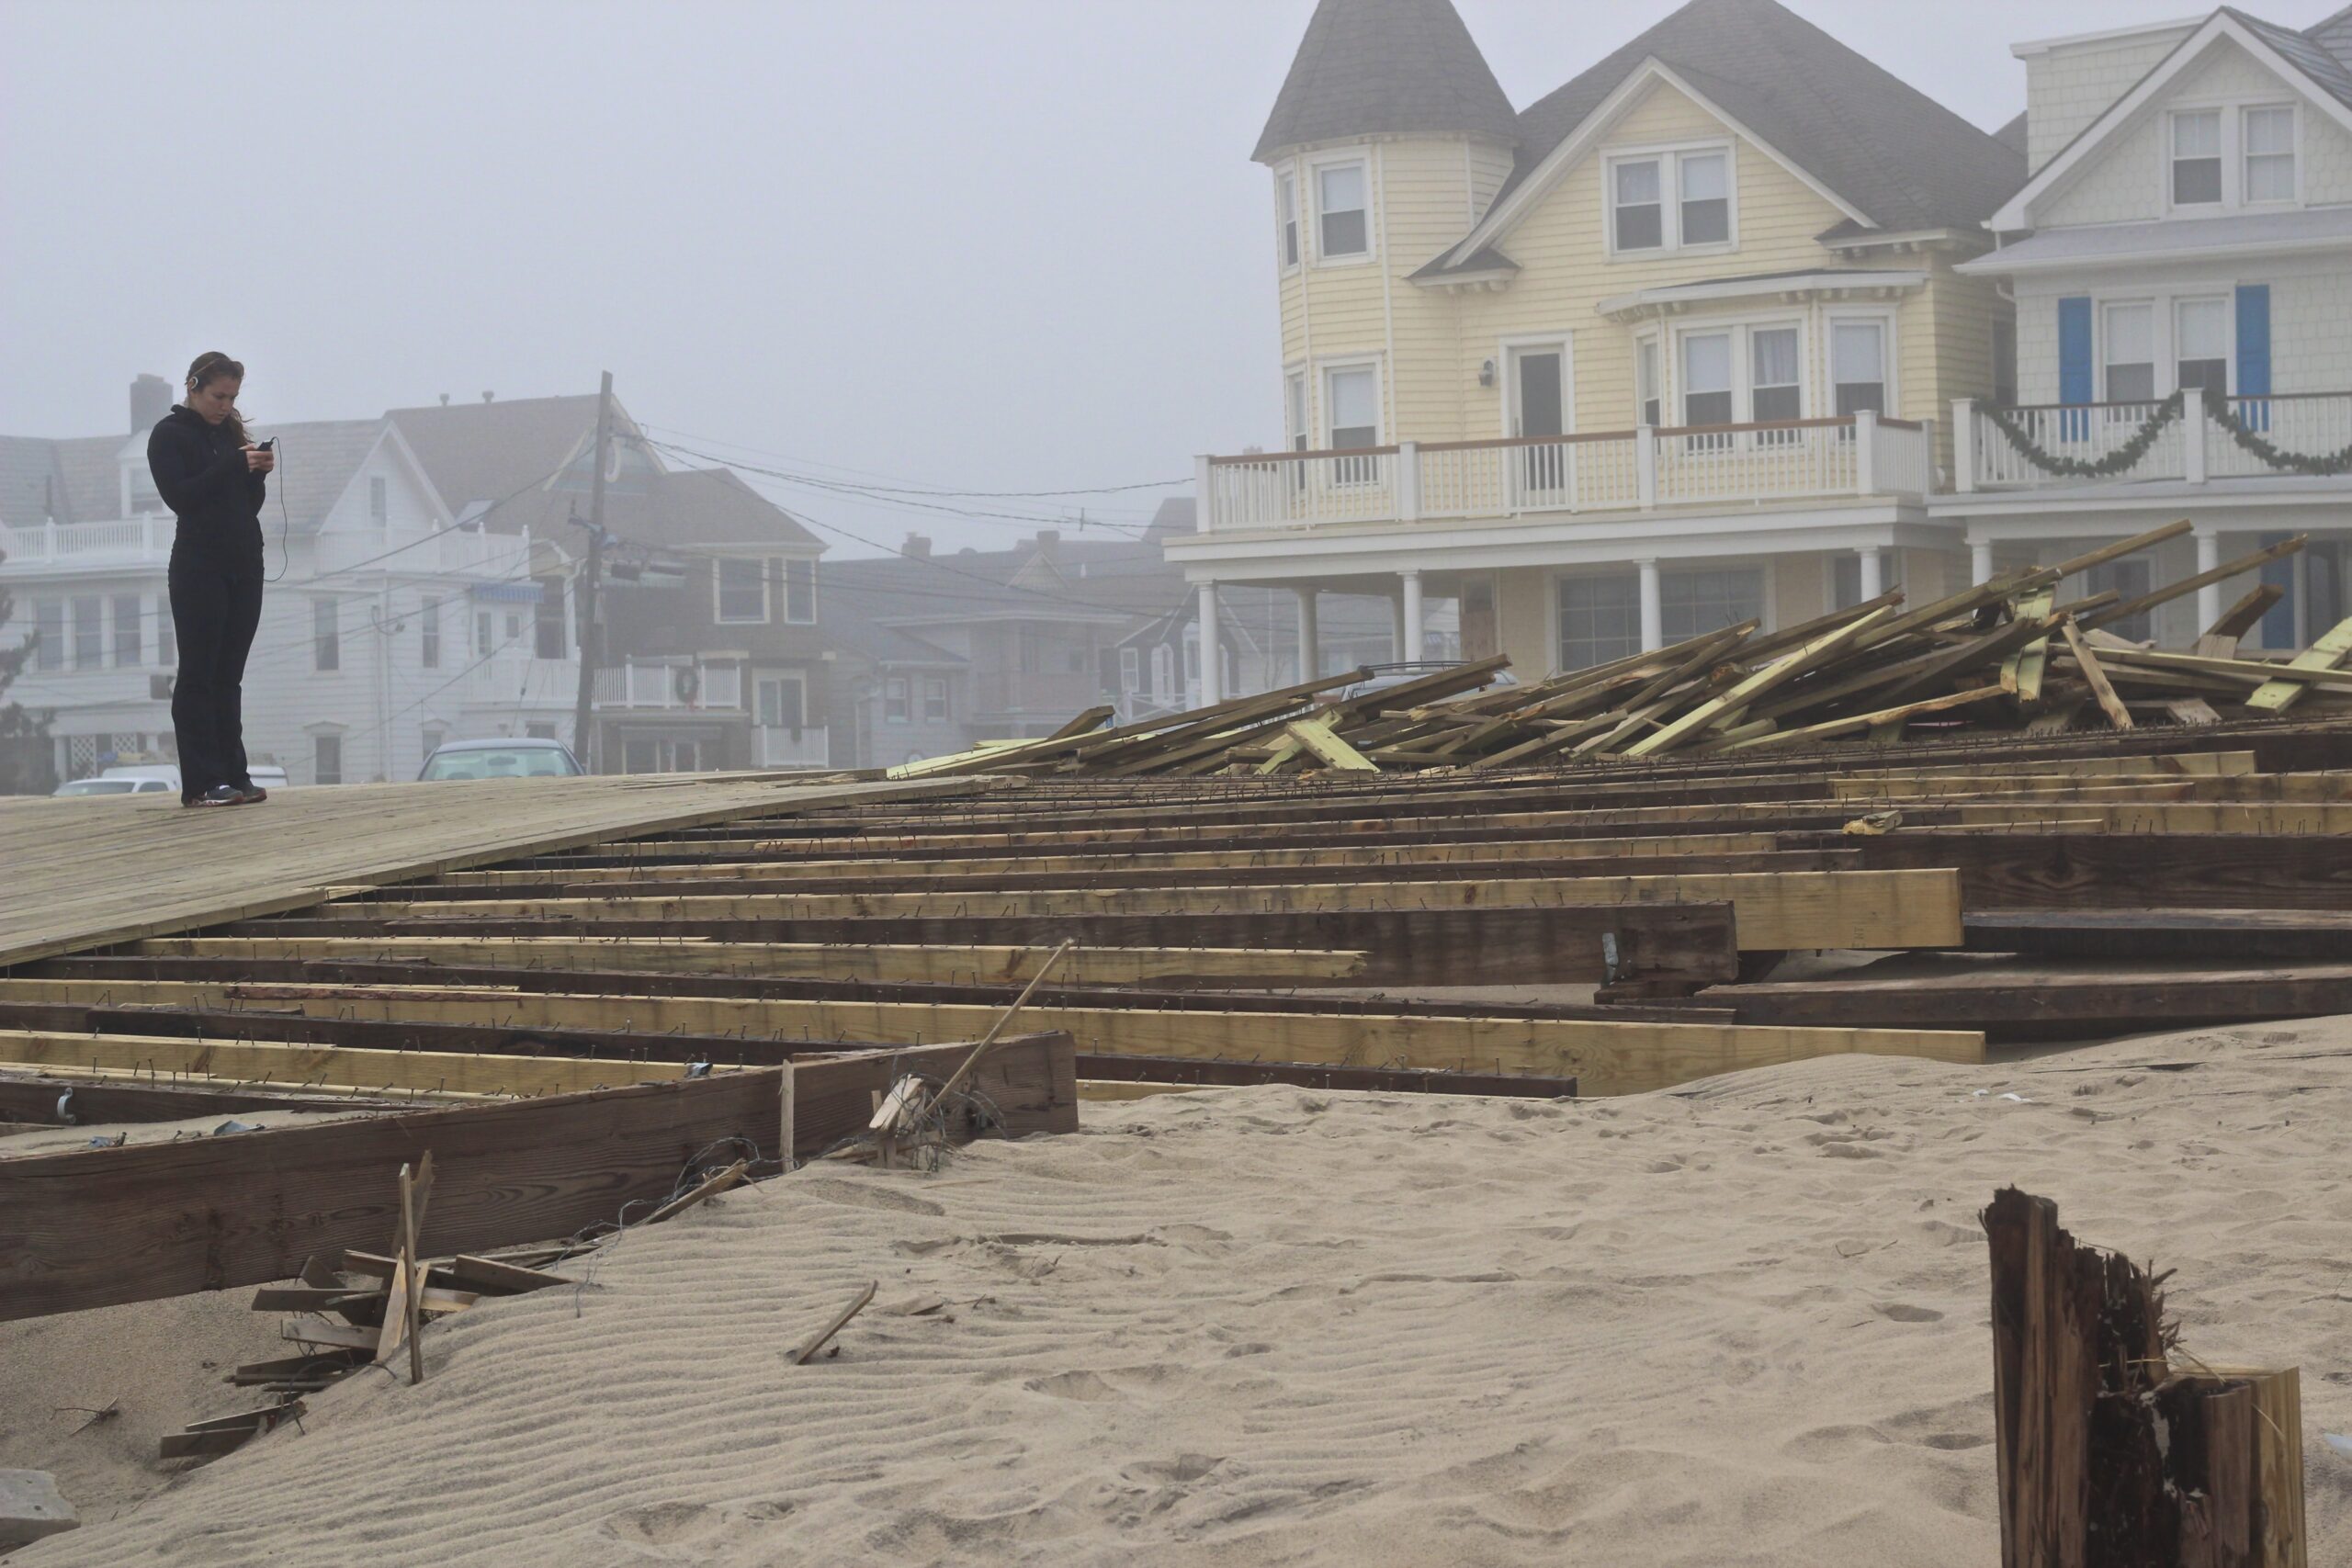 Even after Hurricane Sandy, many people wouldn’t prepare before a future storm